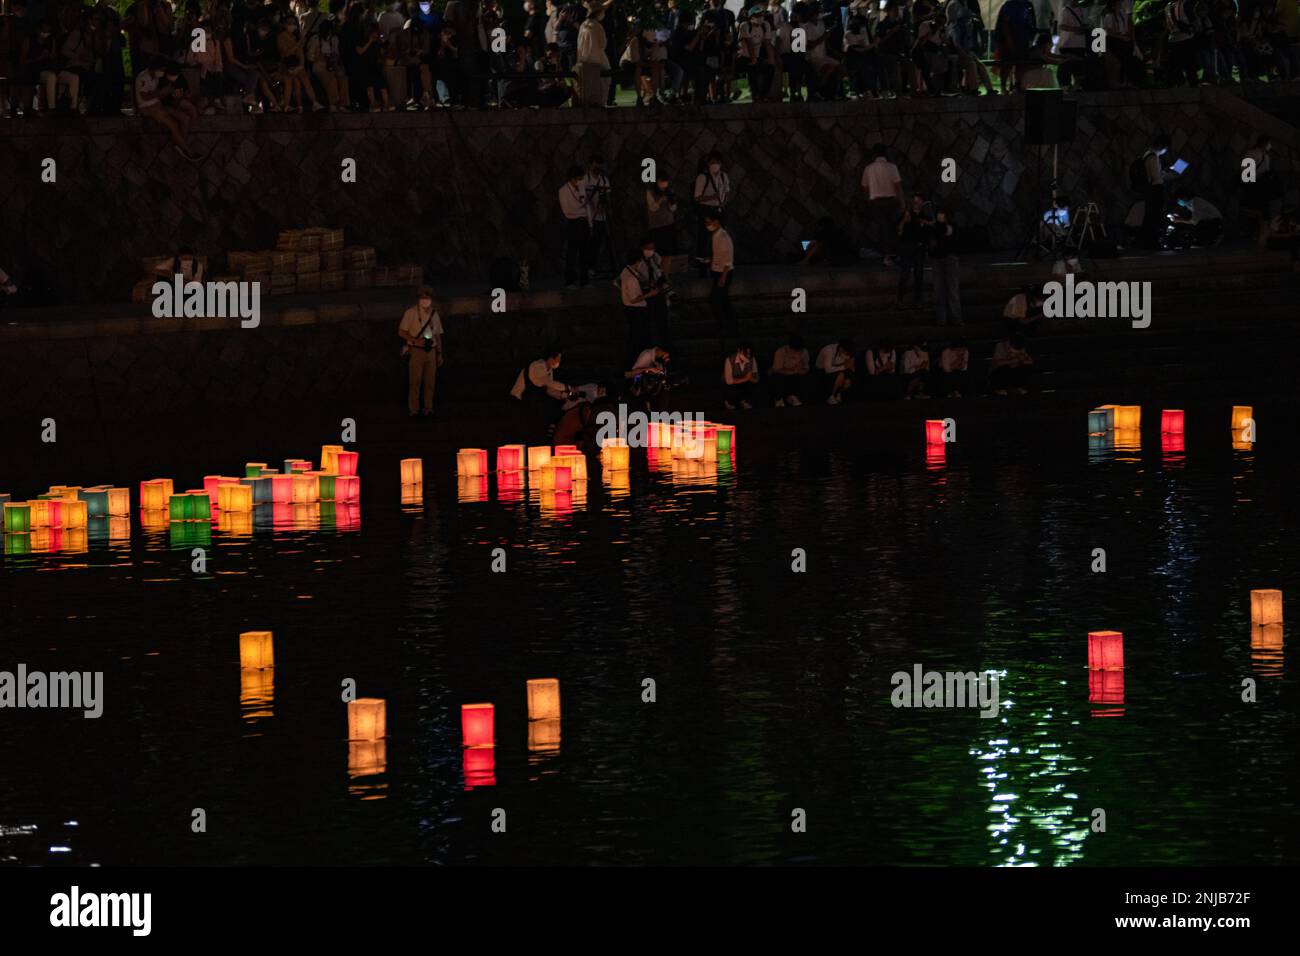 Japanese residents place lanterns on the Motoyasu River during the Peace Message Lantern Floating Ceremony in Hiroshima, Japan, Aug. 6, 2022. The event is held annually to honor those lost to the atomic bombing of Aug. 6, 1945, and to promote peace among nations. Stock Photo